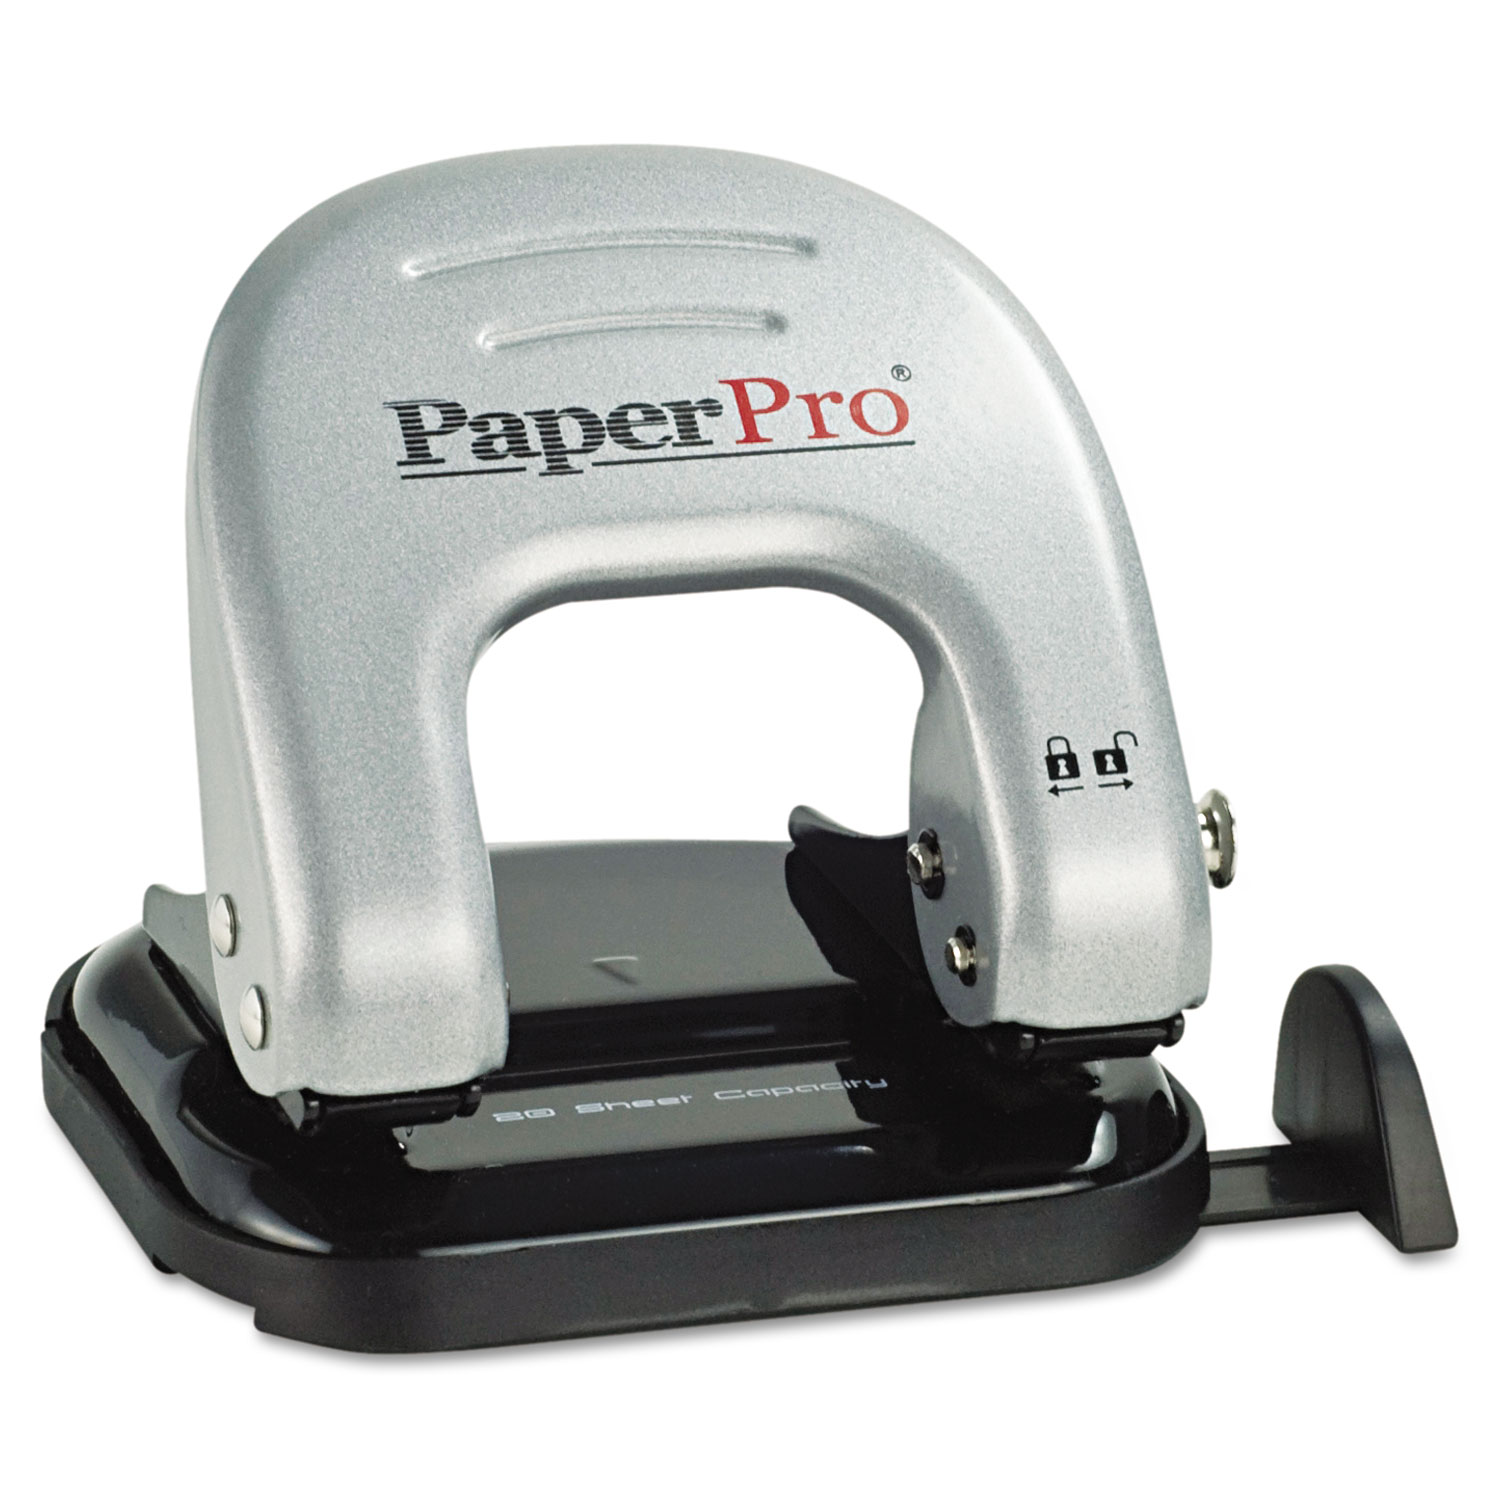 EZ Squeeze Two-Hole Punch, 20-Sheet Capacity, Black/Silver